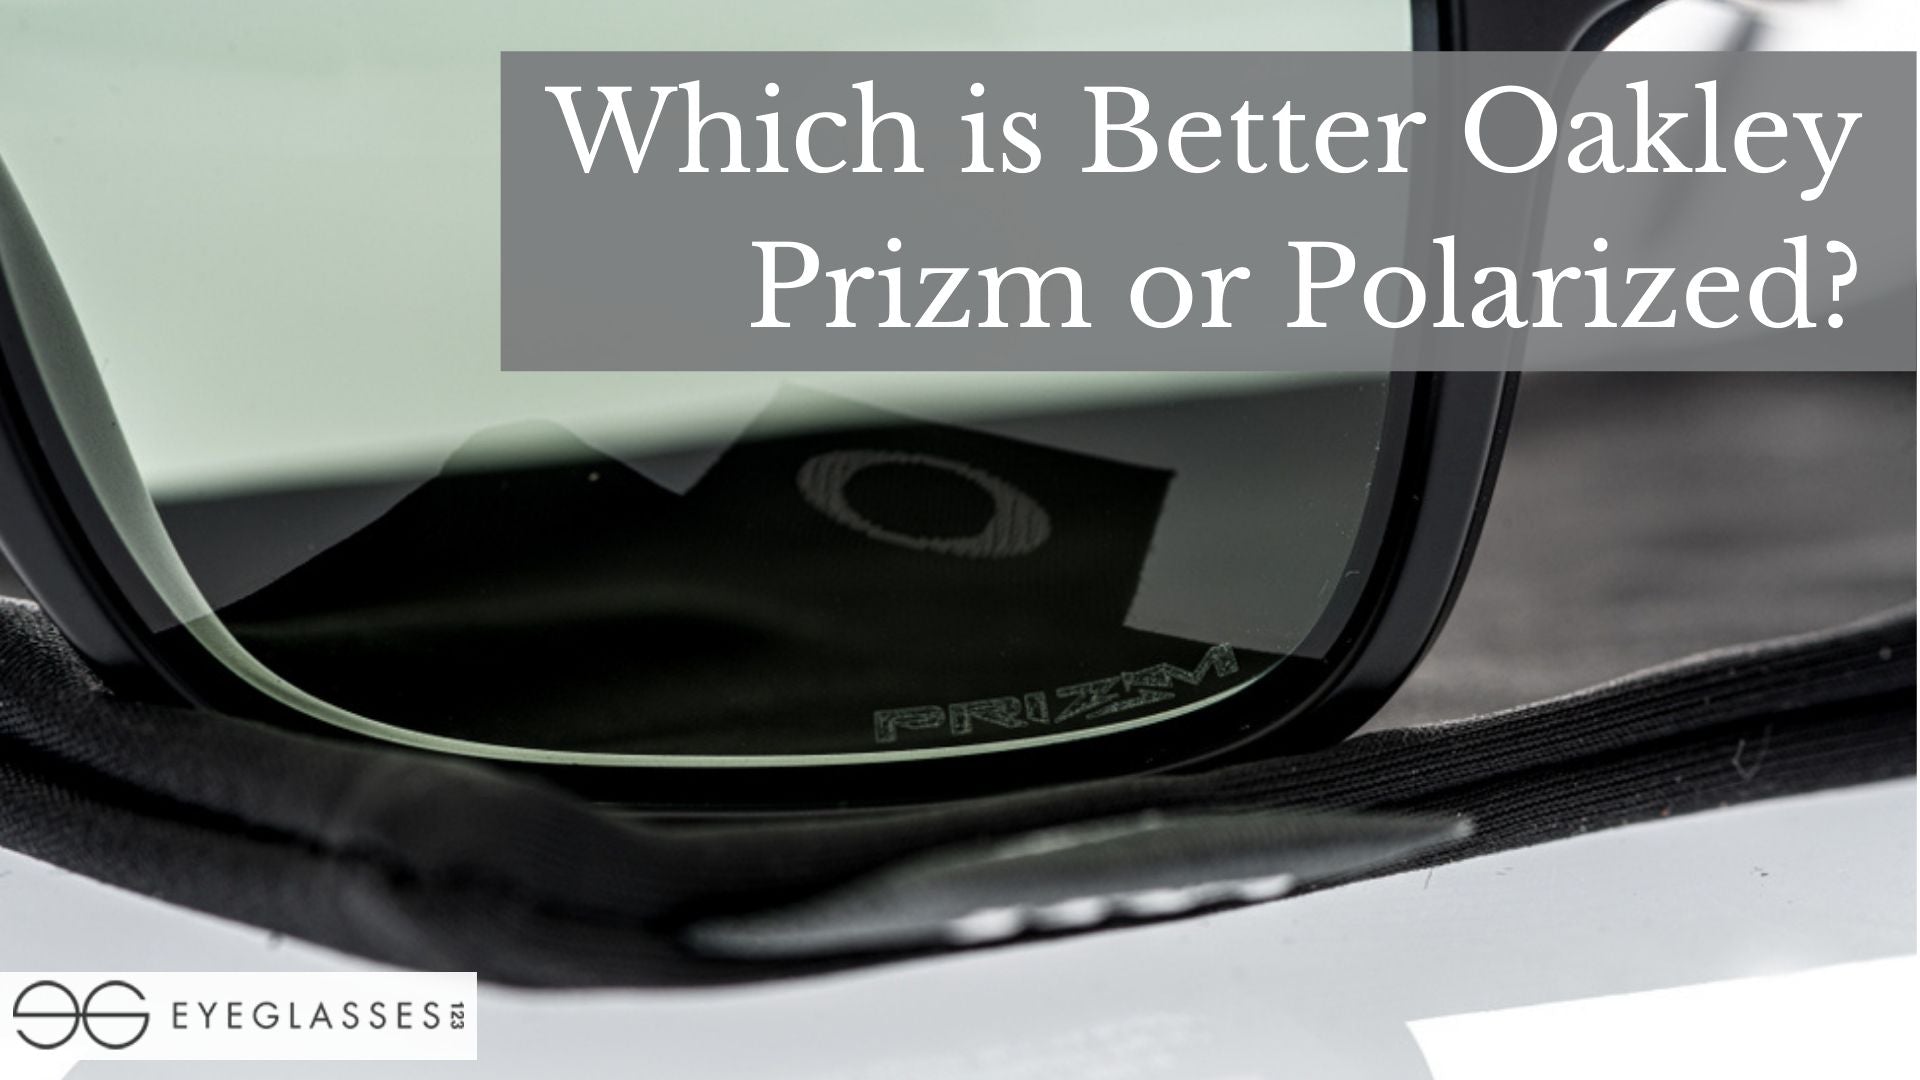 Which is Better Oakley Prizm or Polarized?